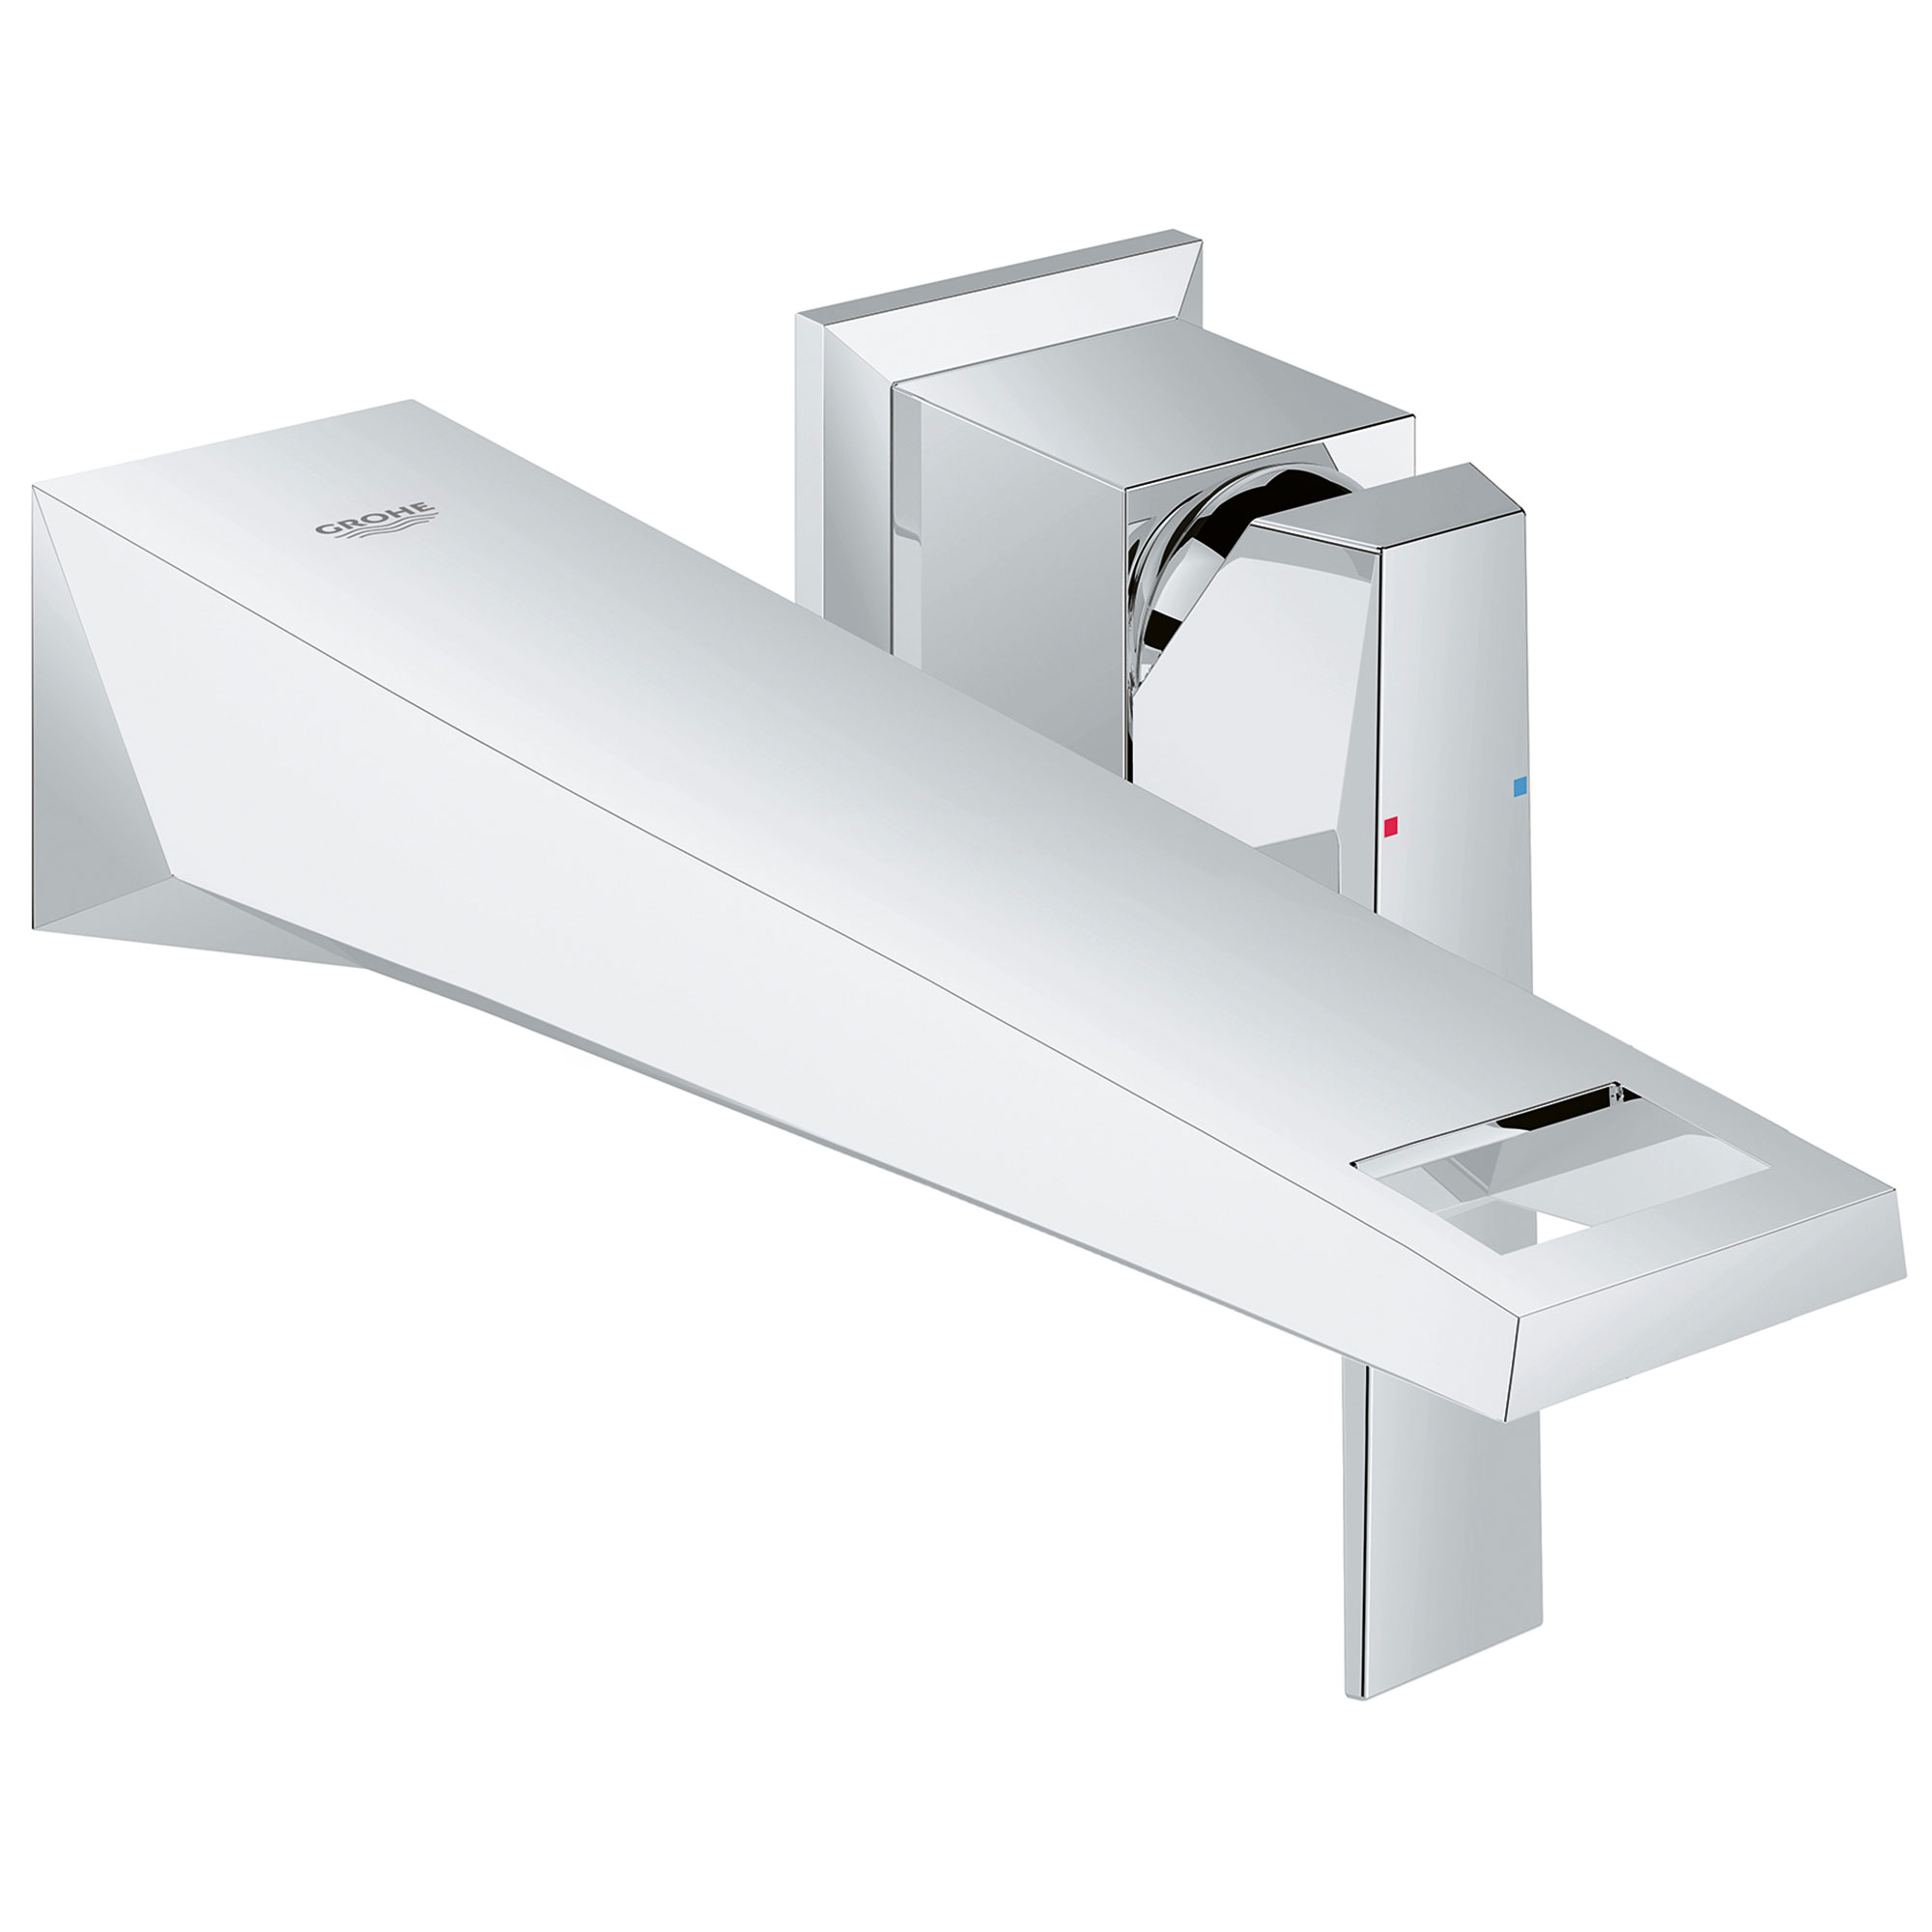 2-Handle Wall Mount Faucet 4.5 L/min (1.2 gpm)